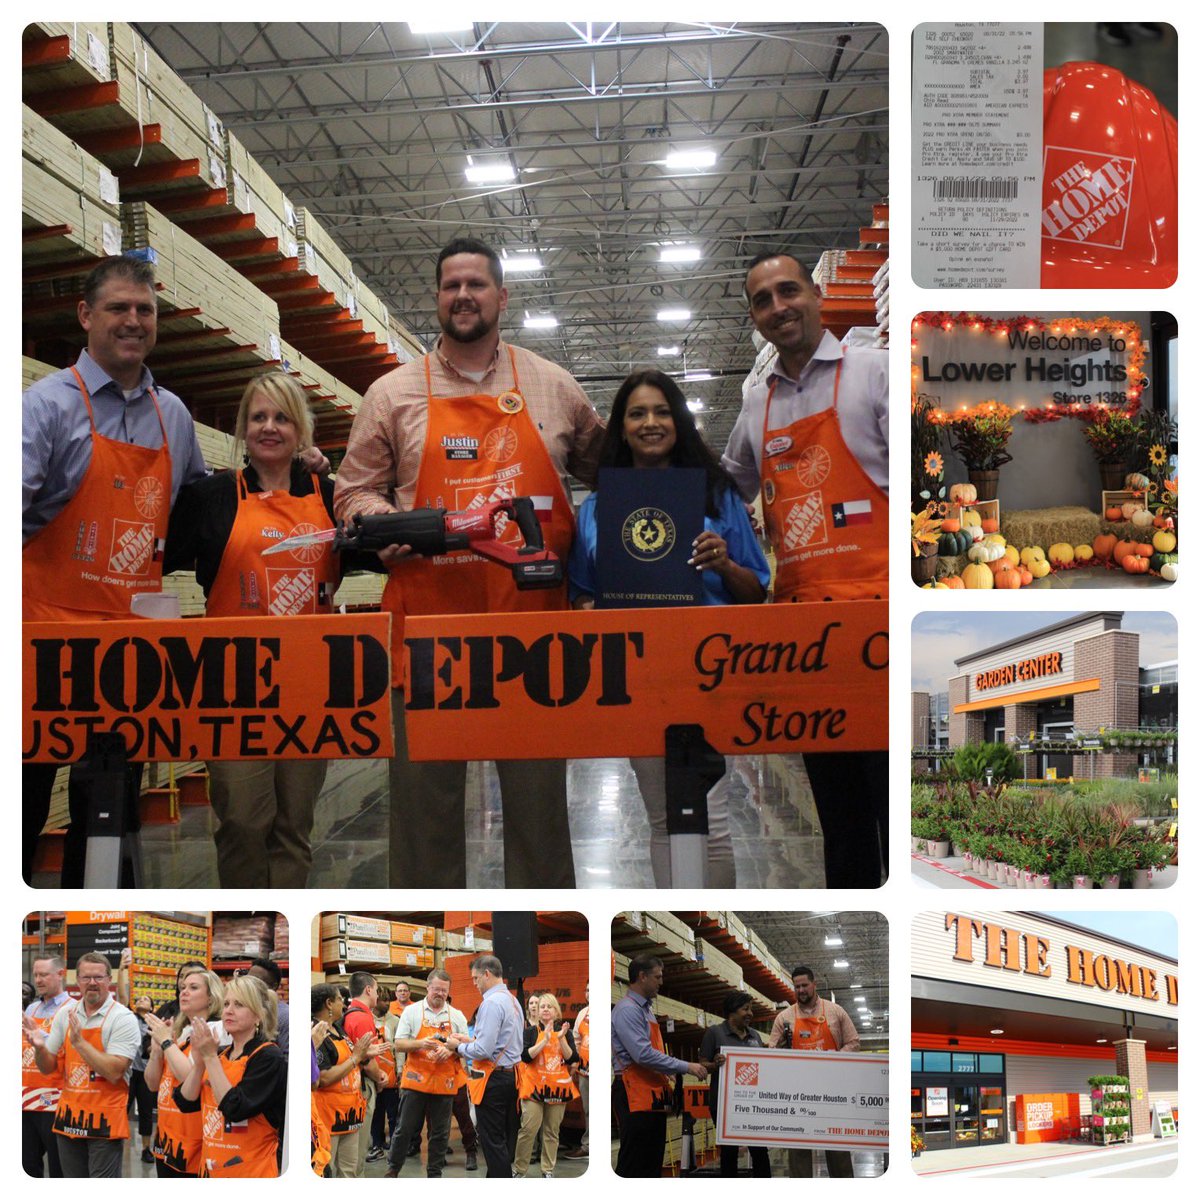 1326 is officially open!!! Thank you all to our hard working associates, D7 and Gulf teams and our great vendors who helped get us here! @MejutoAllen @dontamcam @bjp84 @kelly_mayhall